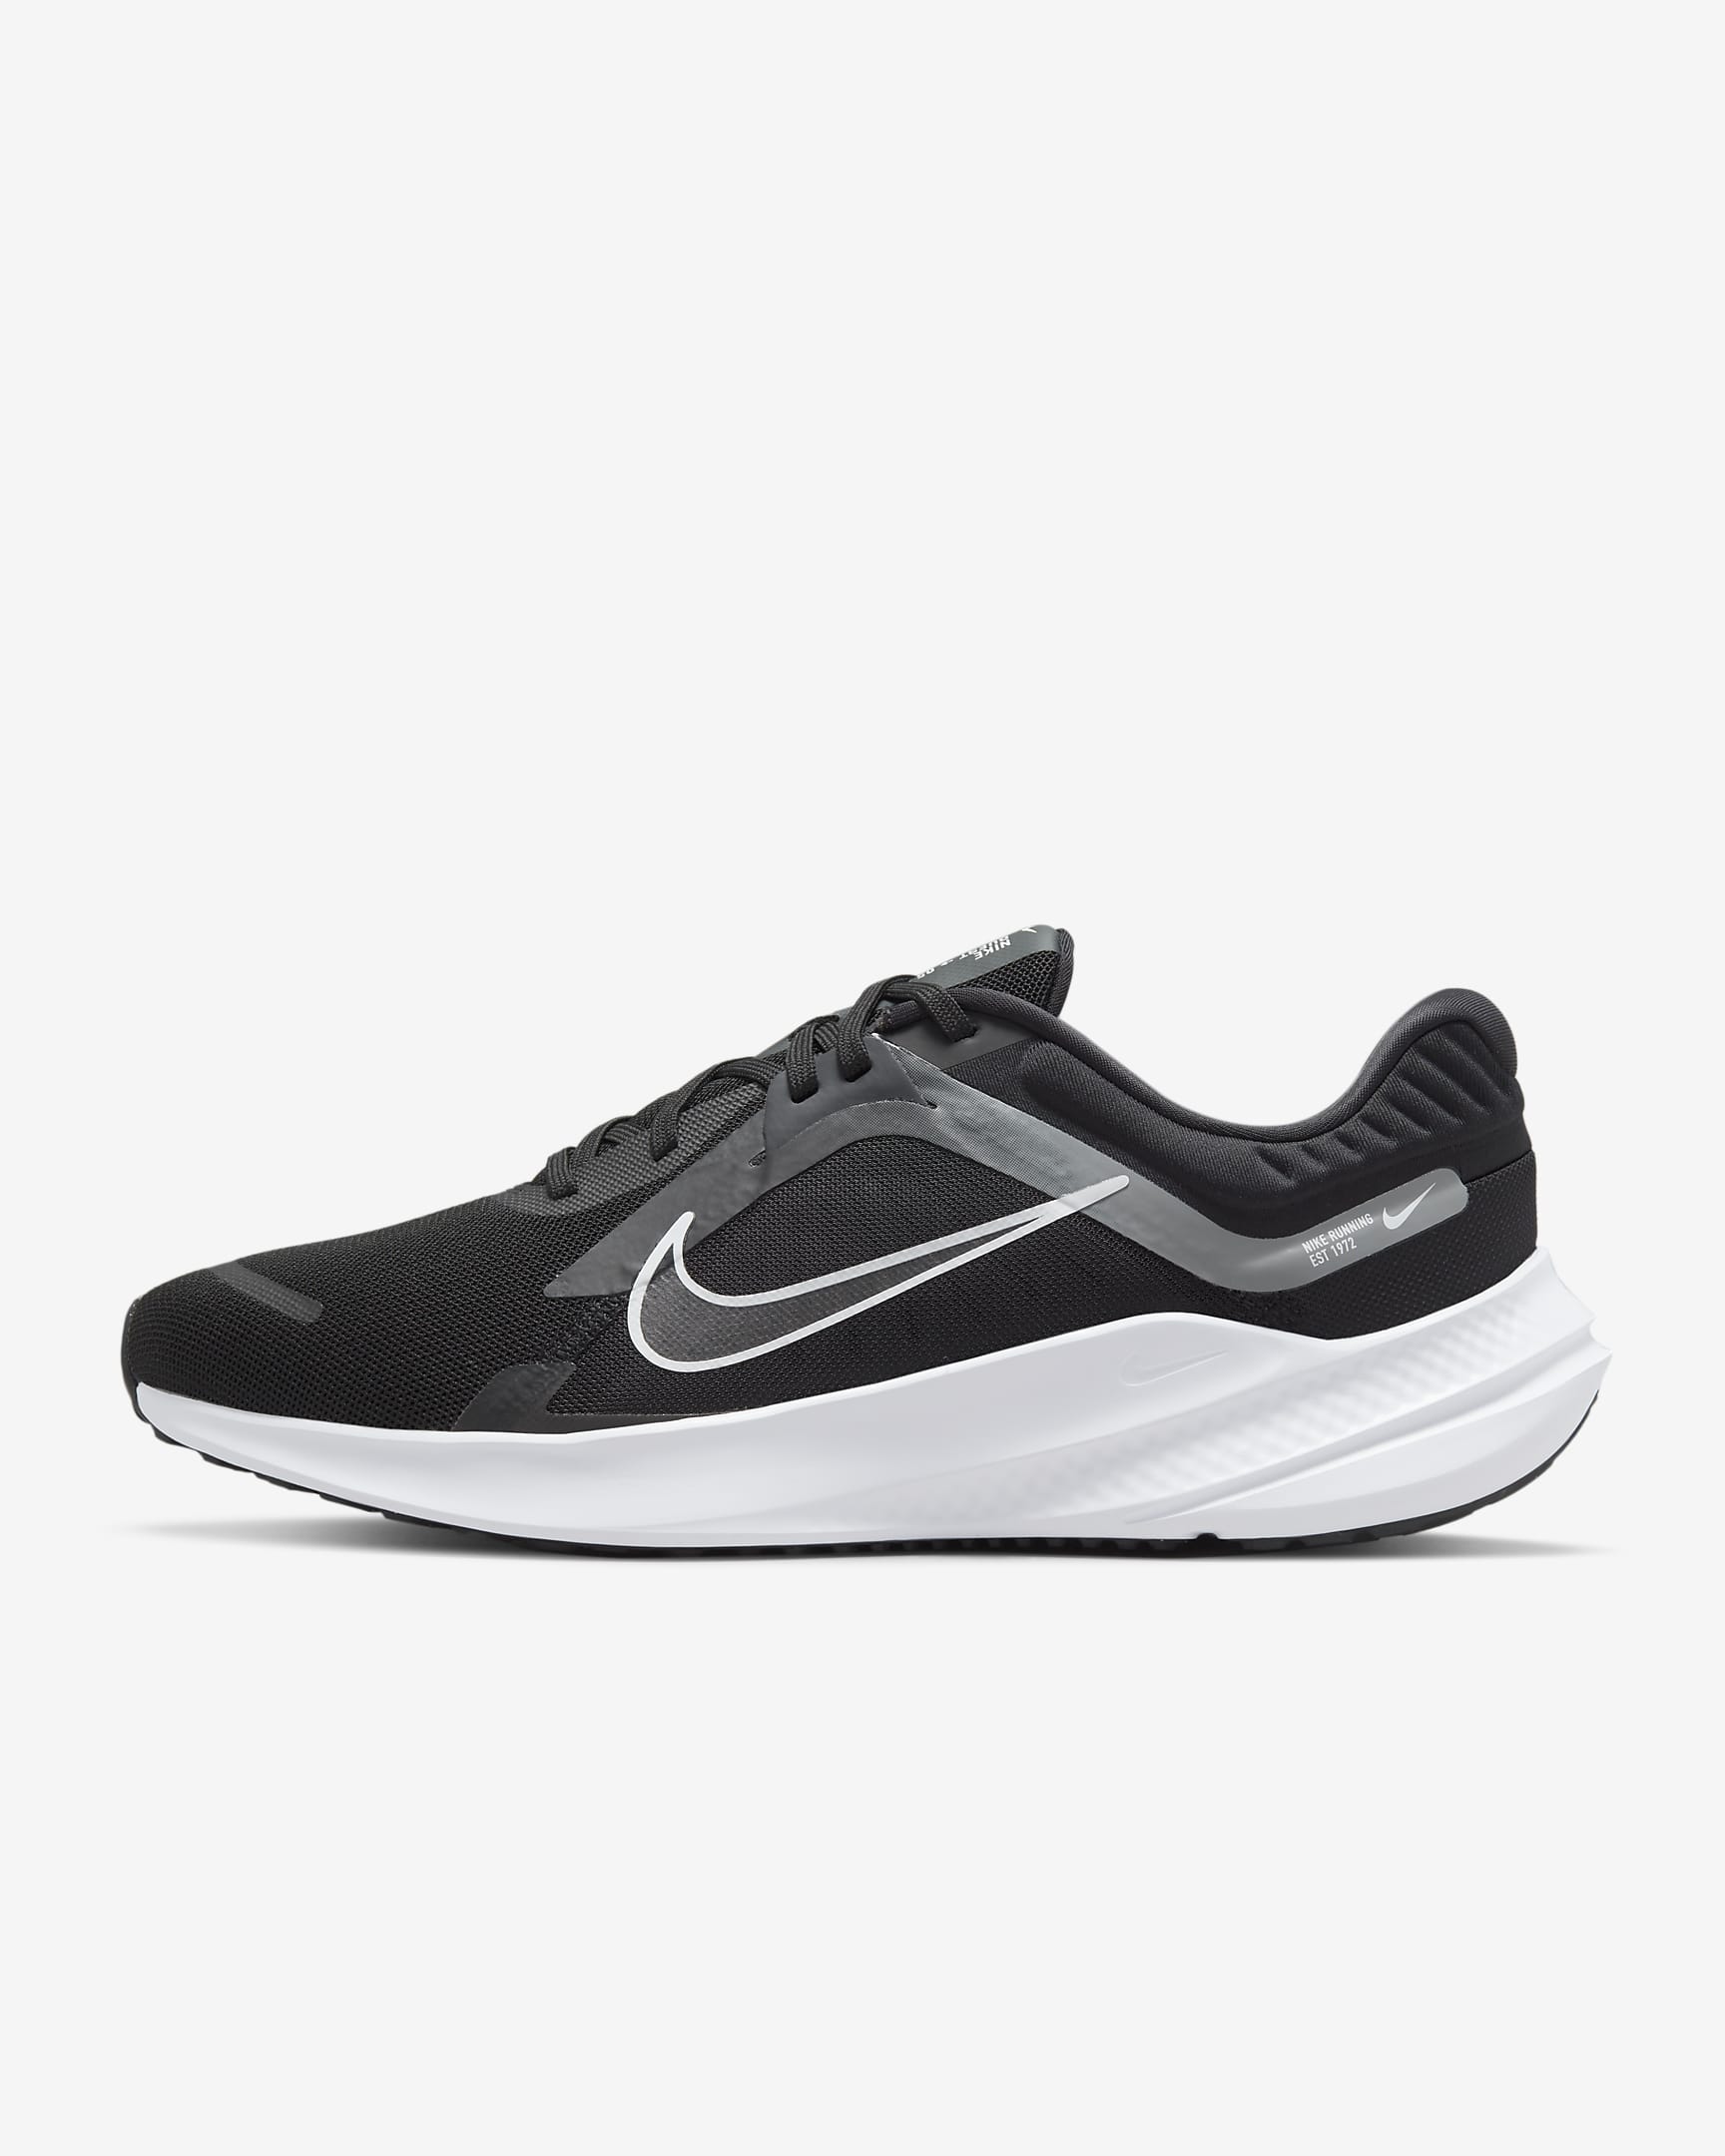 Nike Quest 5 Men's Road Running Shoes. Nike IL